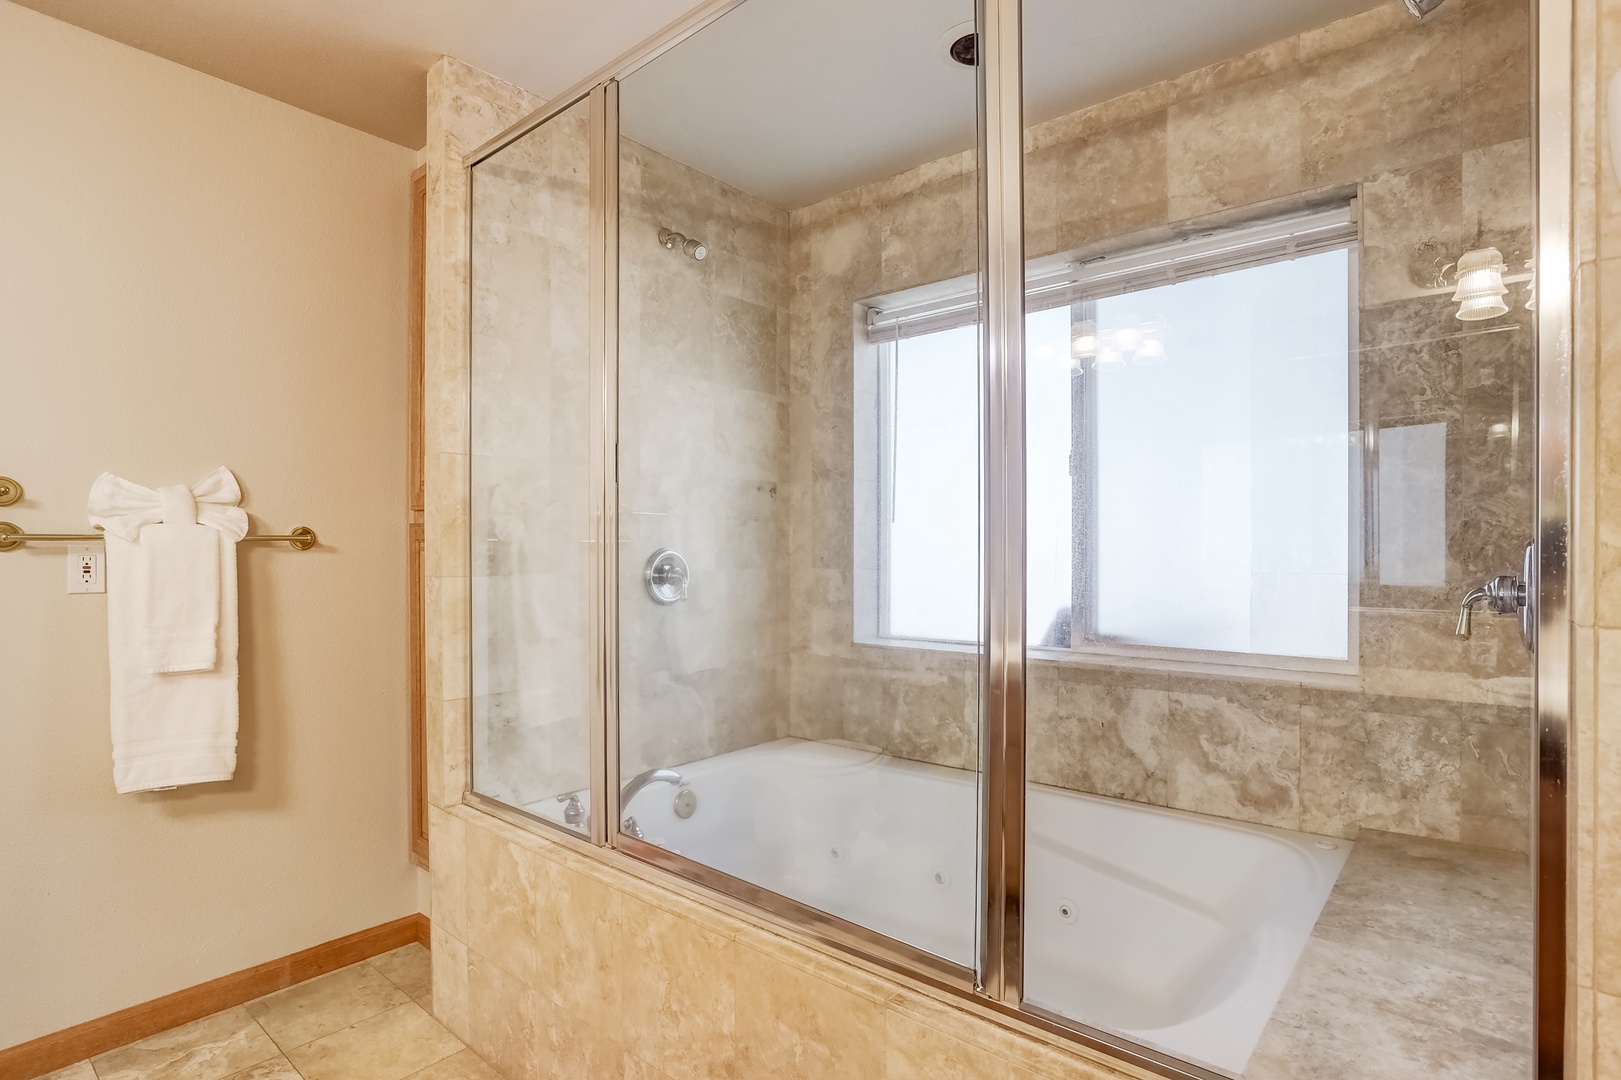 En suite bathroom with dual sinks and shower/tub combo